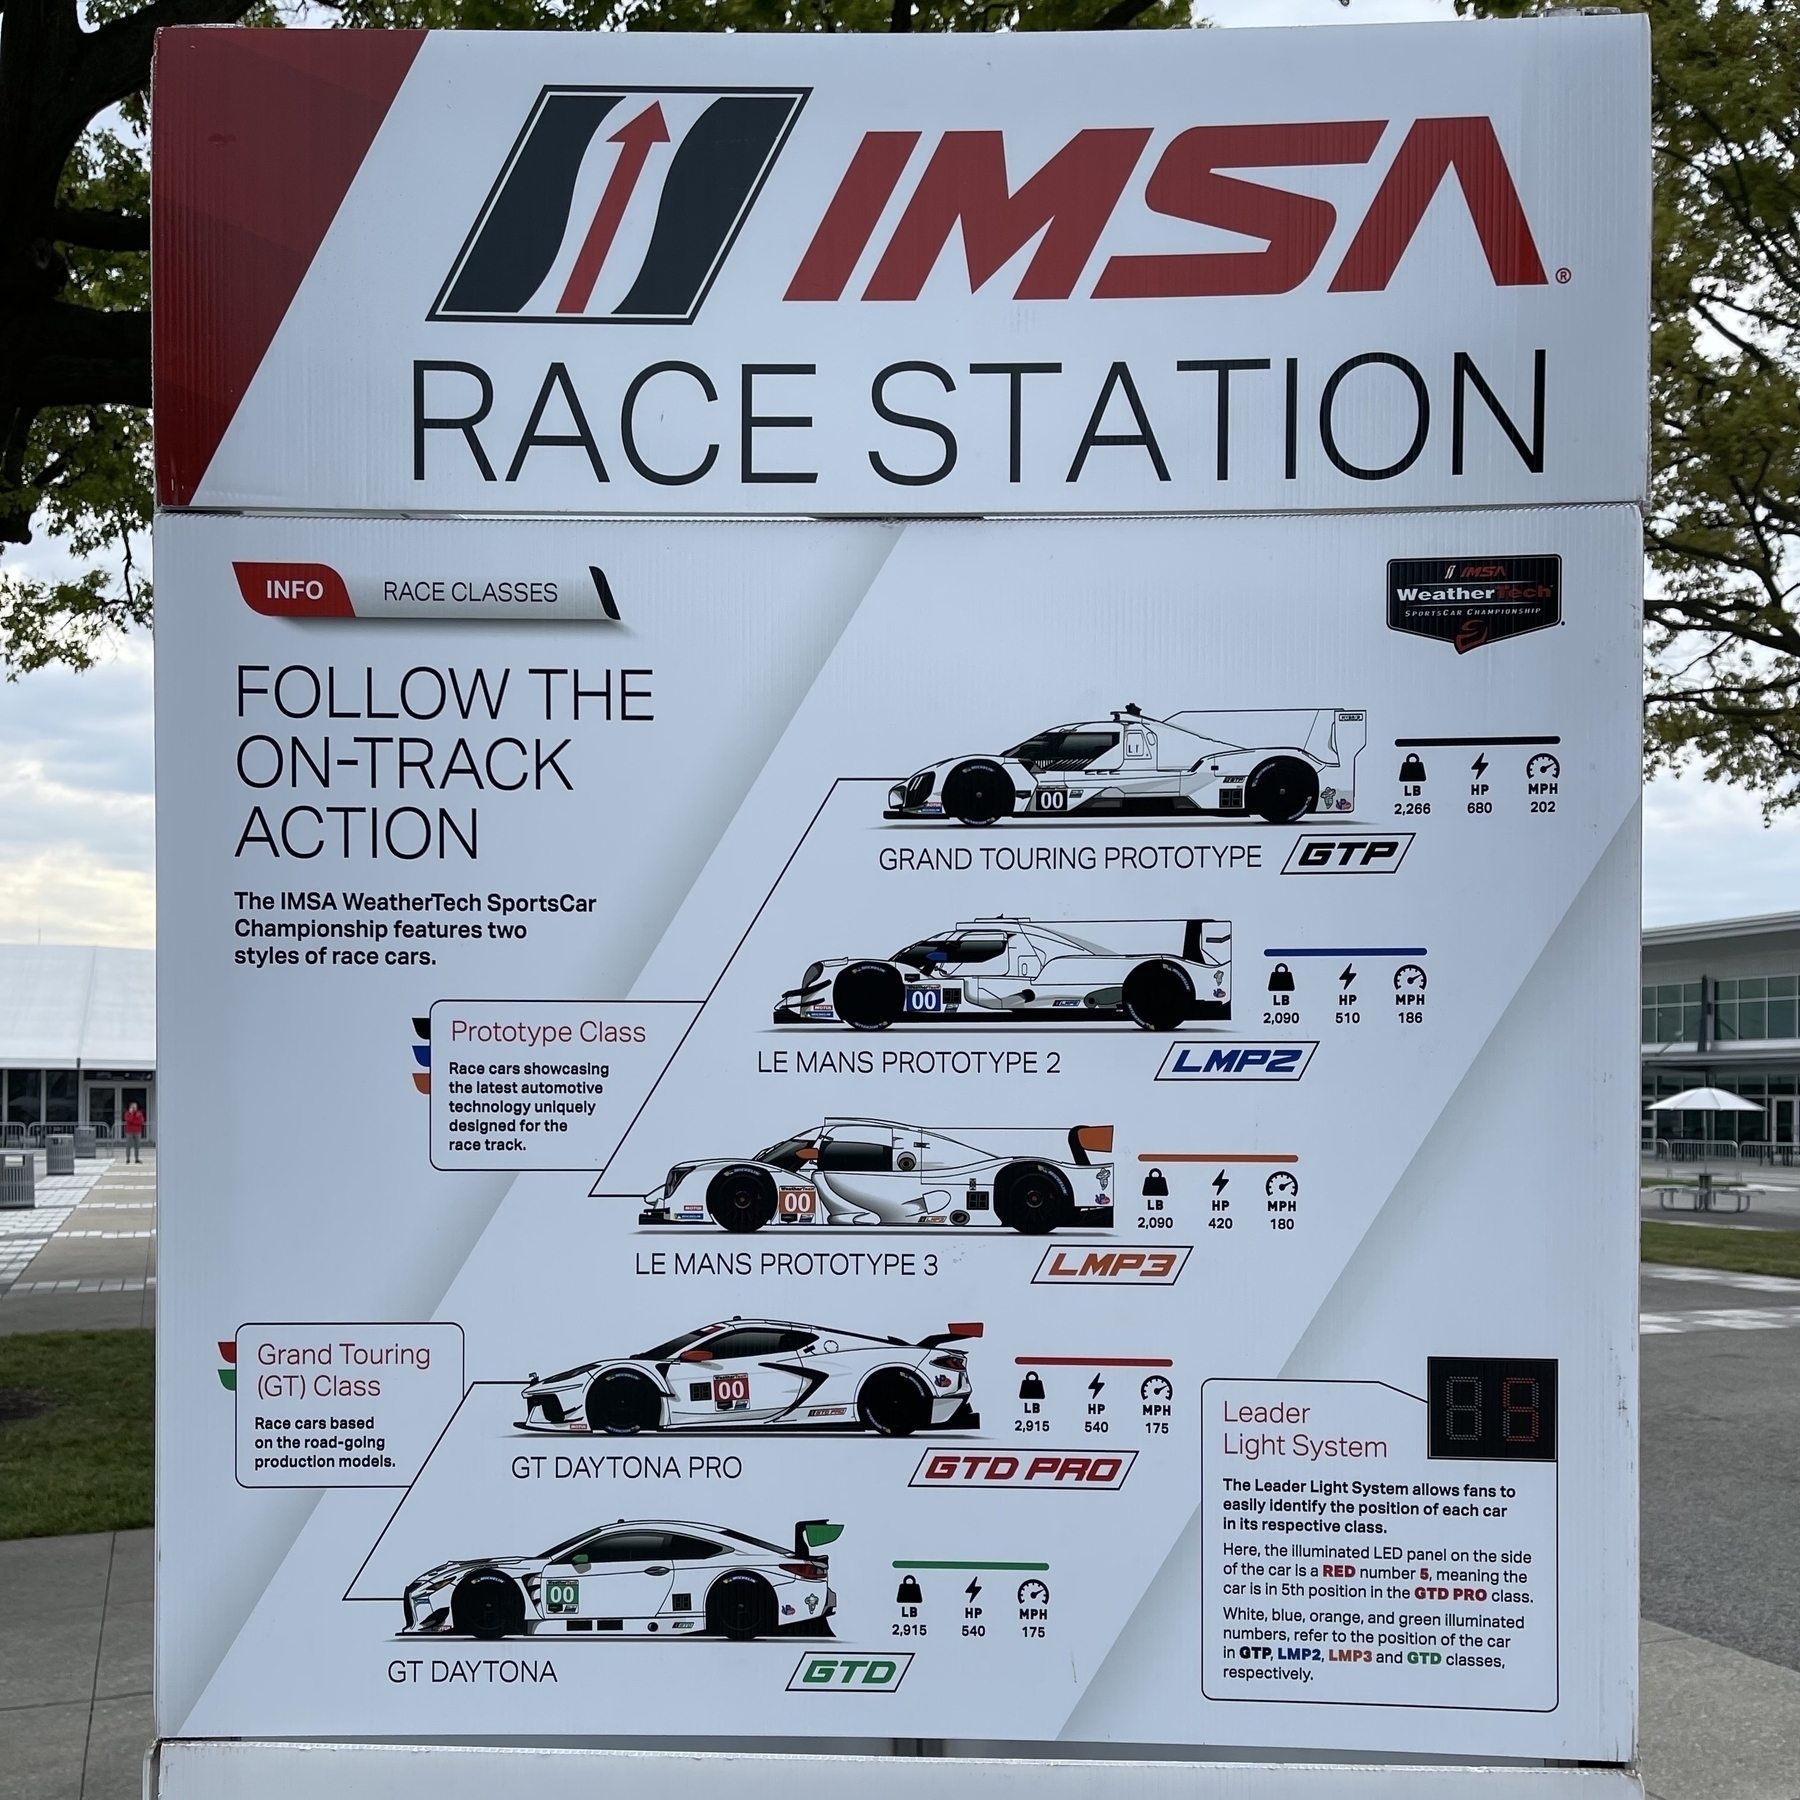 IMSA race station depicting the types of cars (3 prototype classes and 2 grand touring classes).